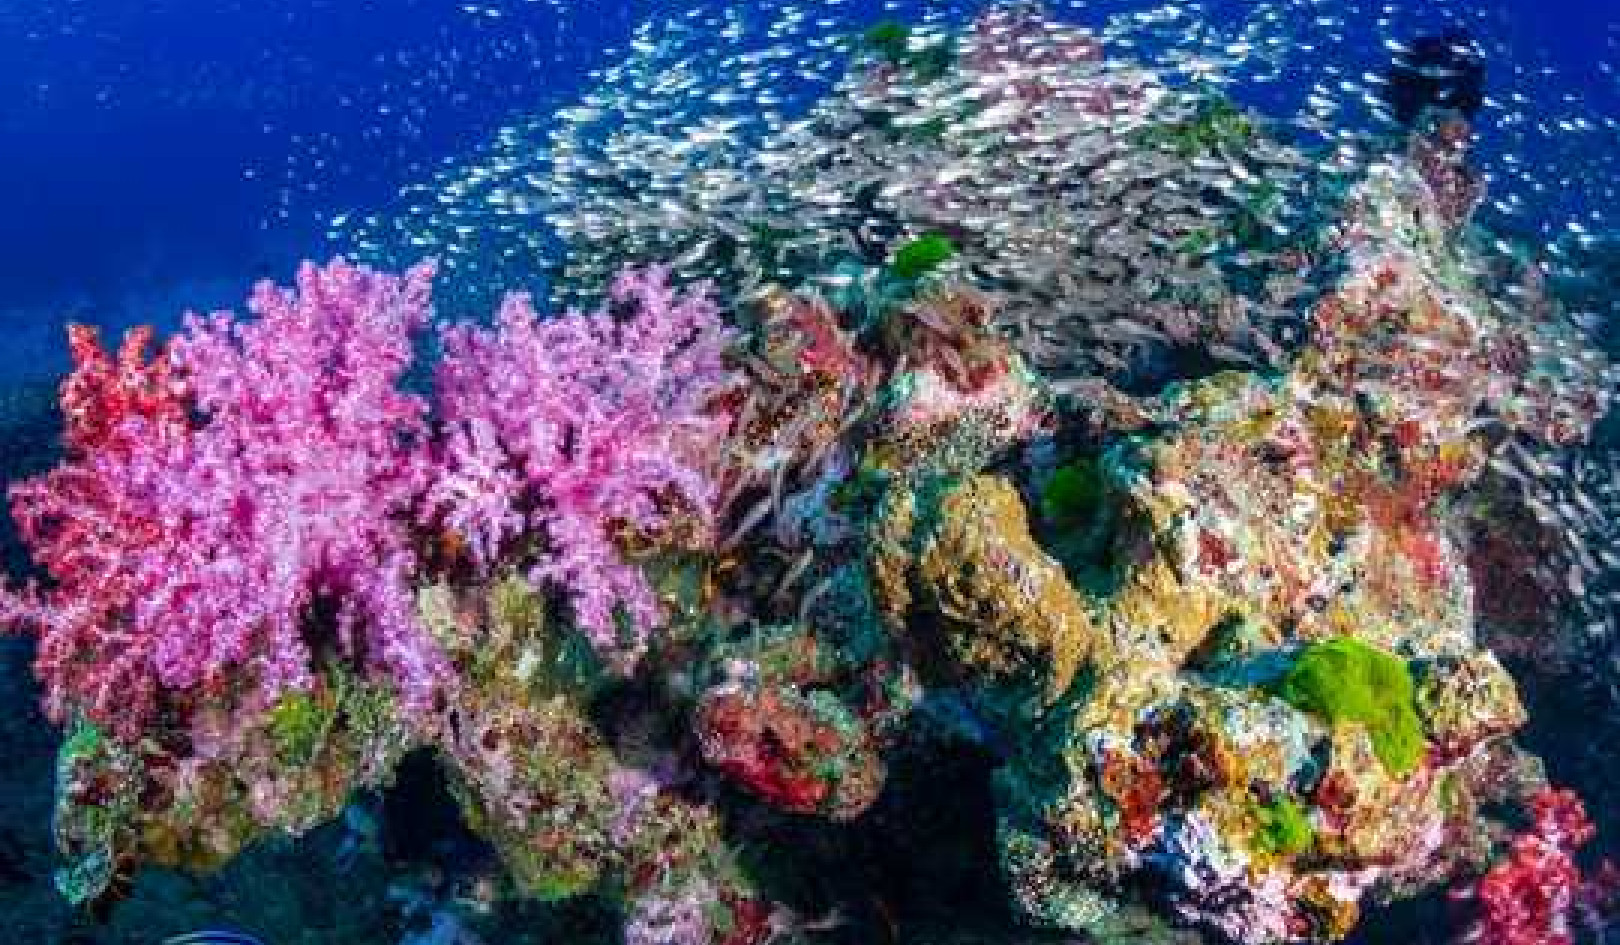 Can An Underwater Soundtrack Really Bring Coral Reefs Back To Life?